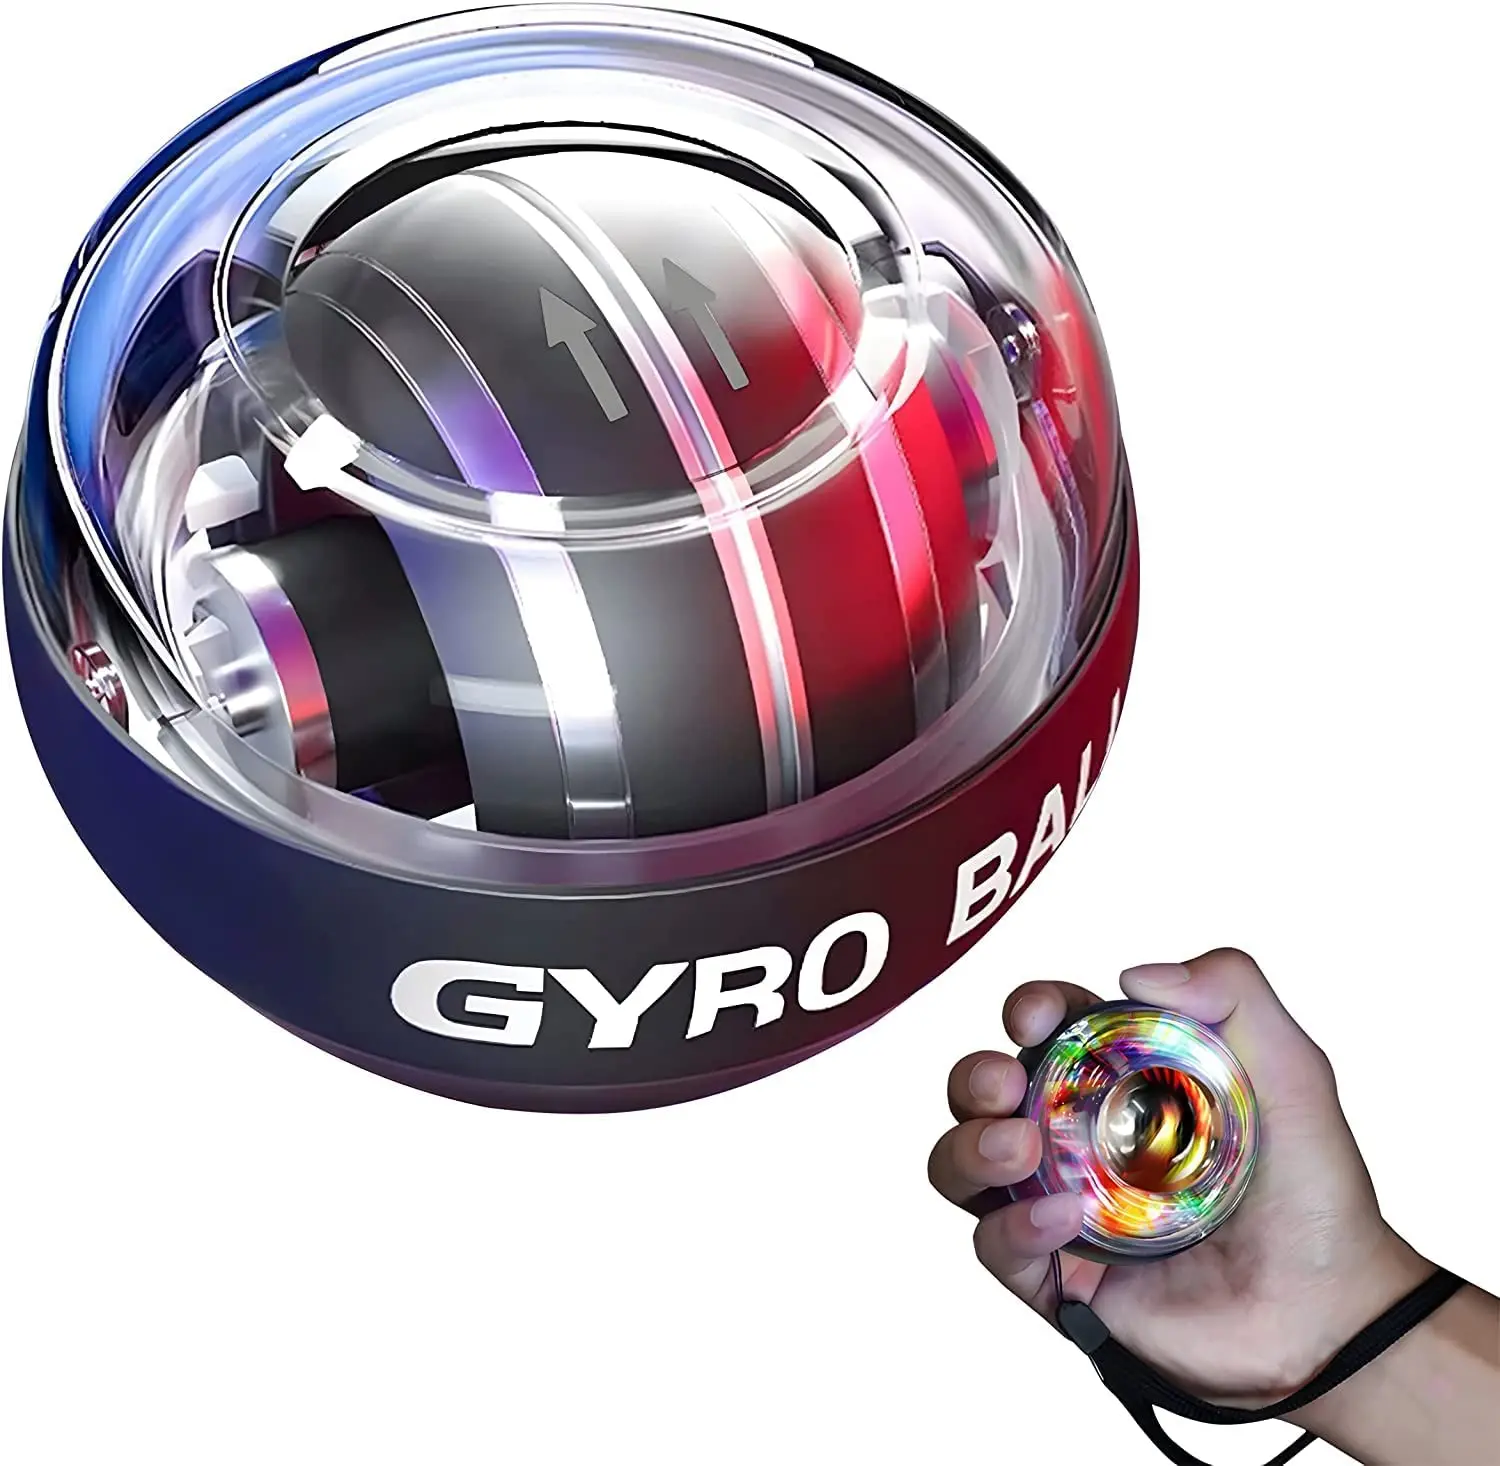 

Wrist Trainer Ball Wrist Strengthener Gyro Self Starting Forearm Gyro Ball Strengthening The Bones Muscles of The Wrists Arms